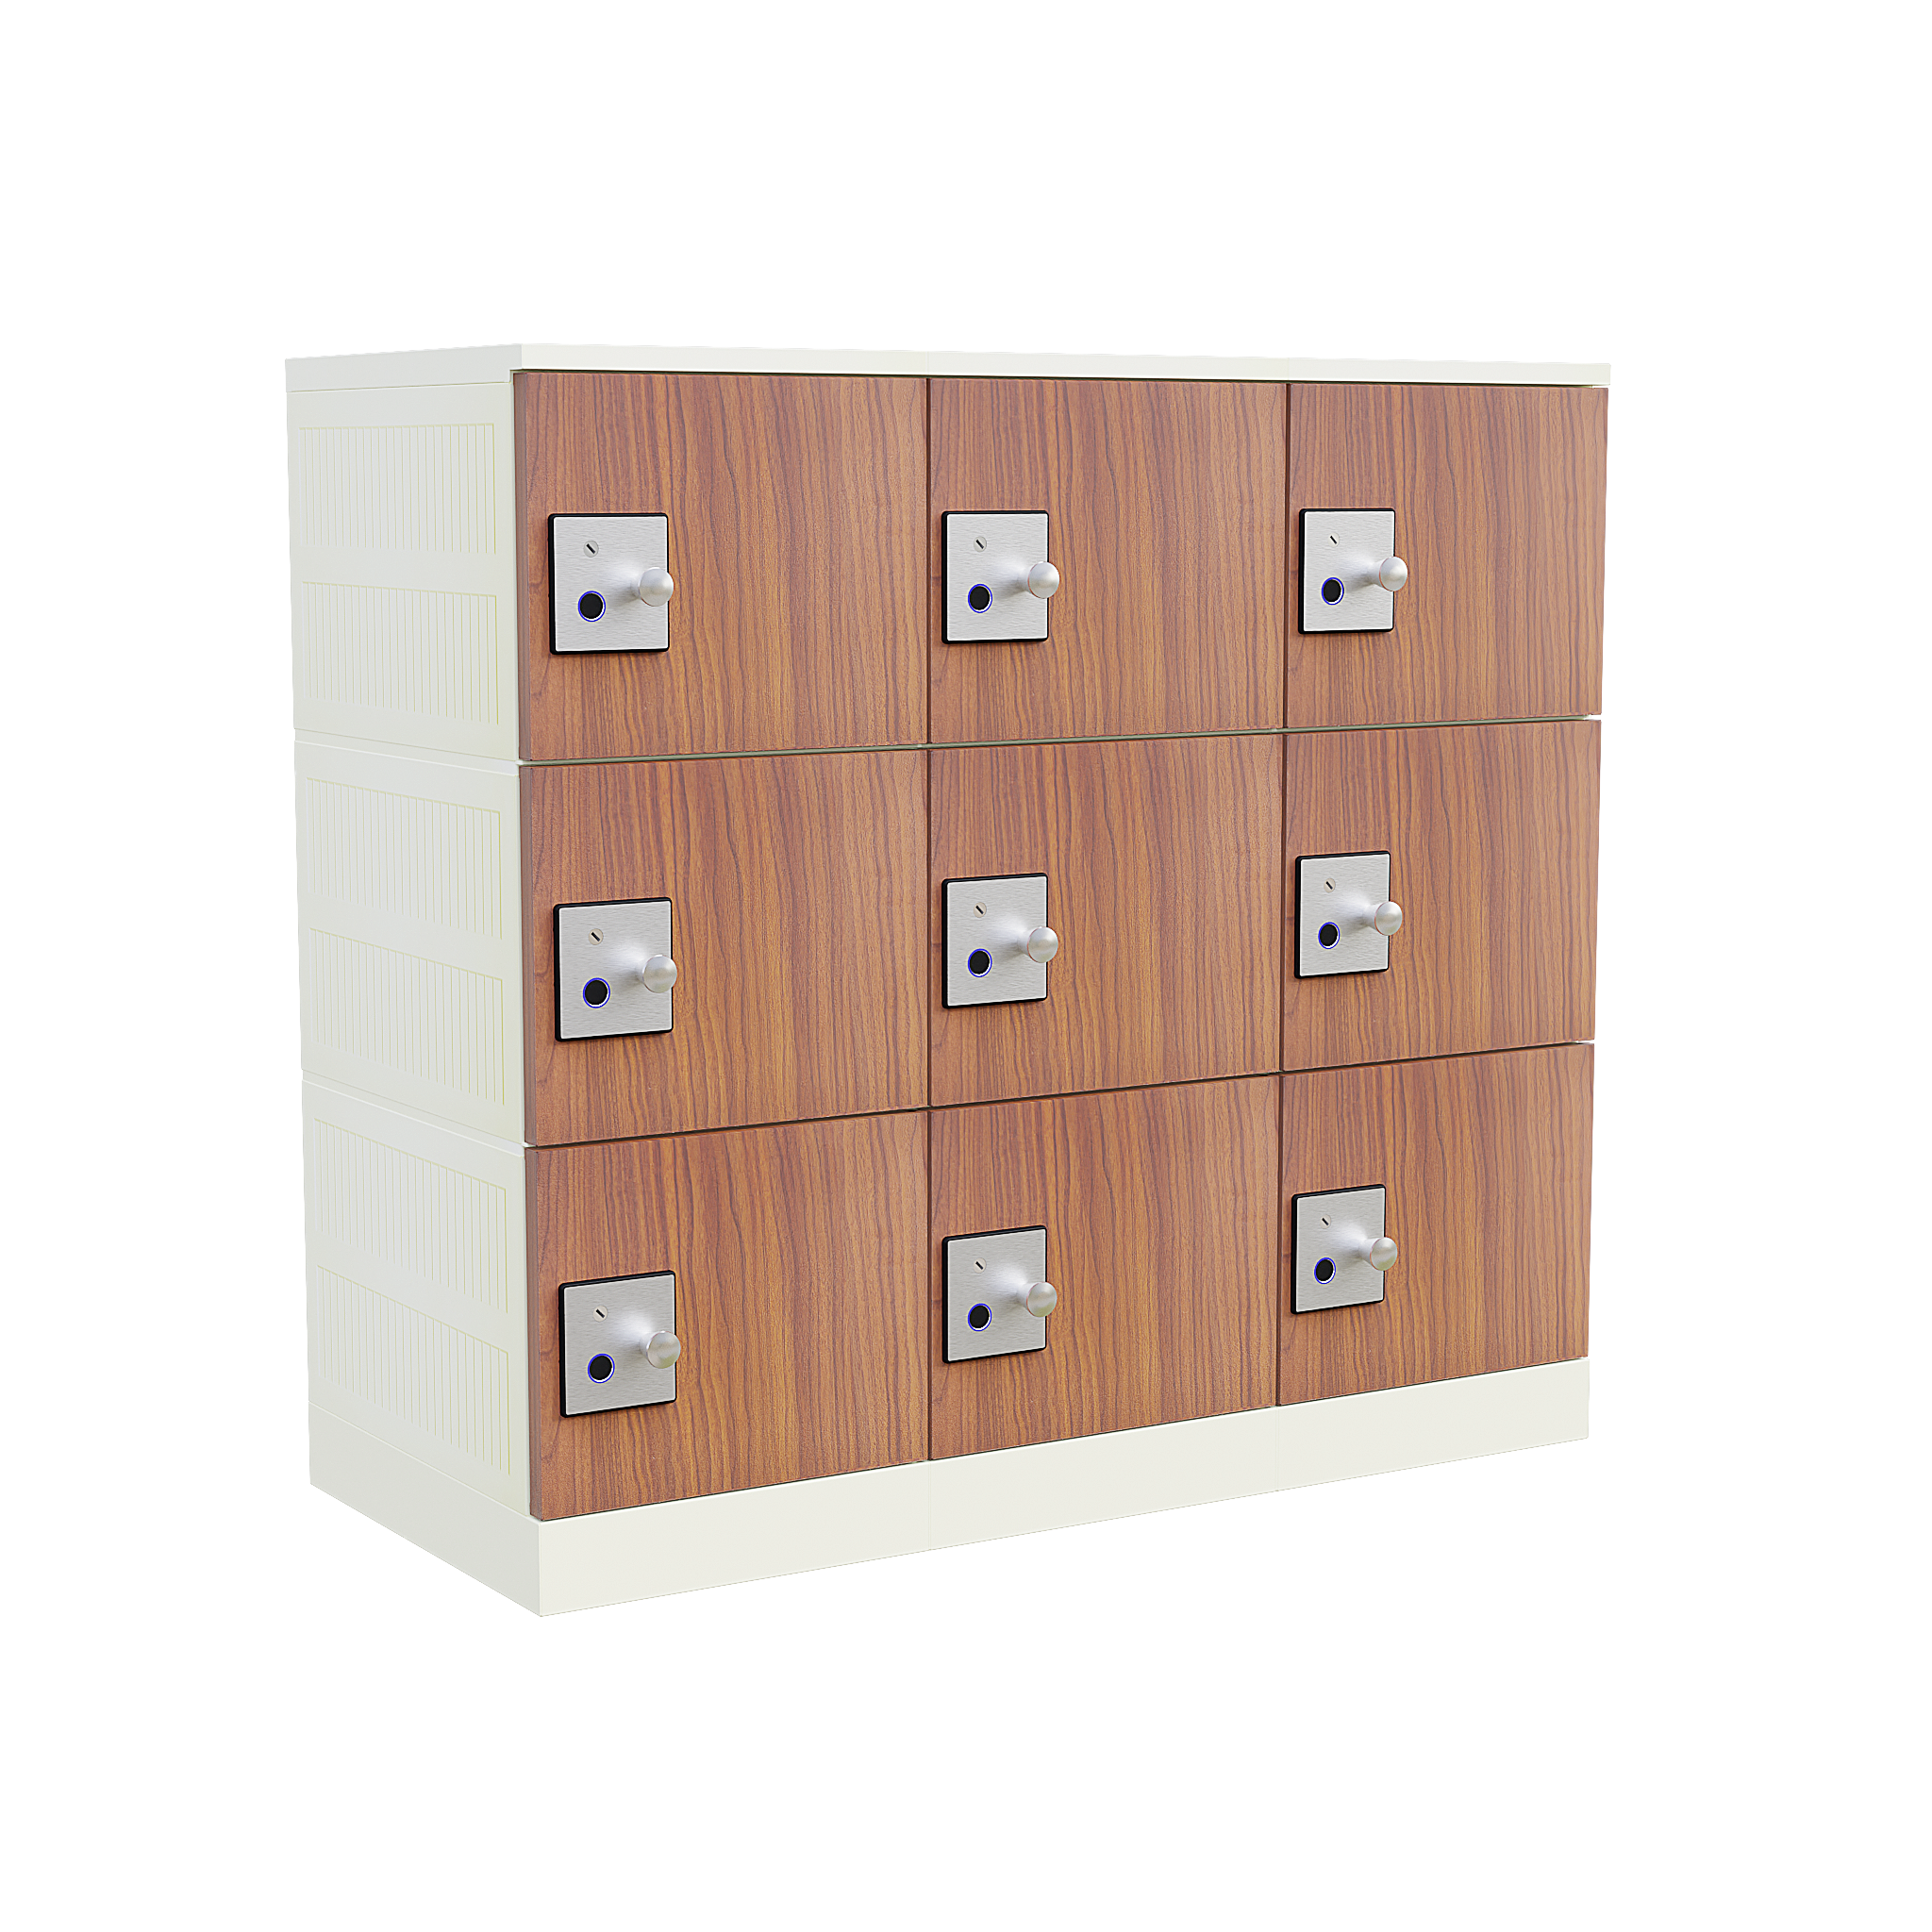 Things to Consider When Buying Smart Parcel Lockers